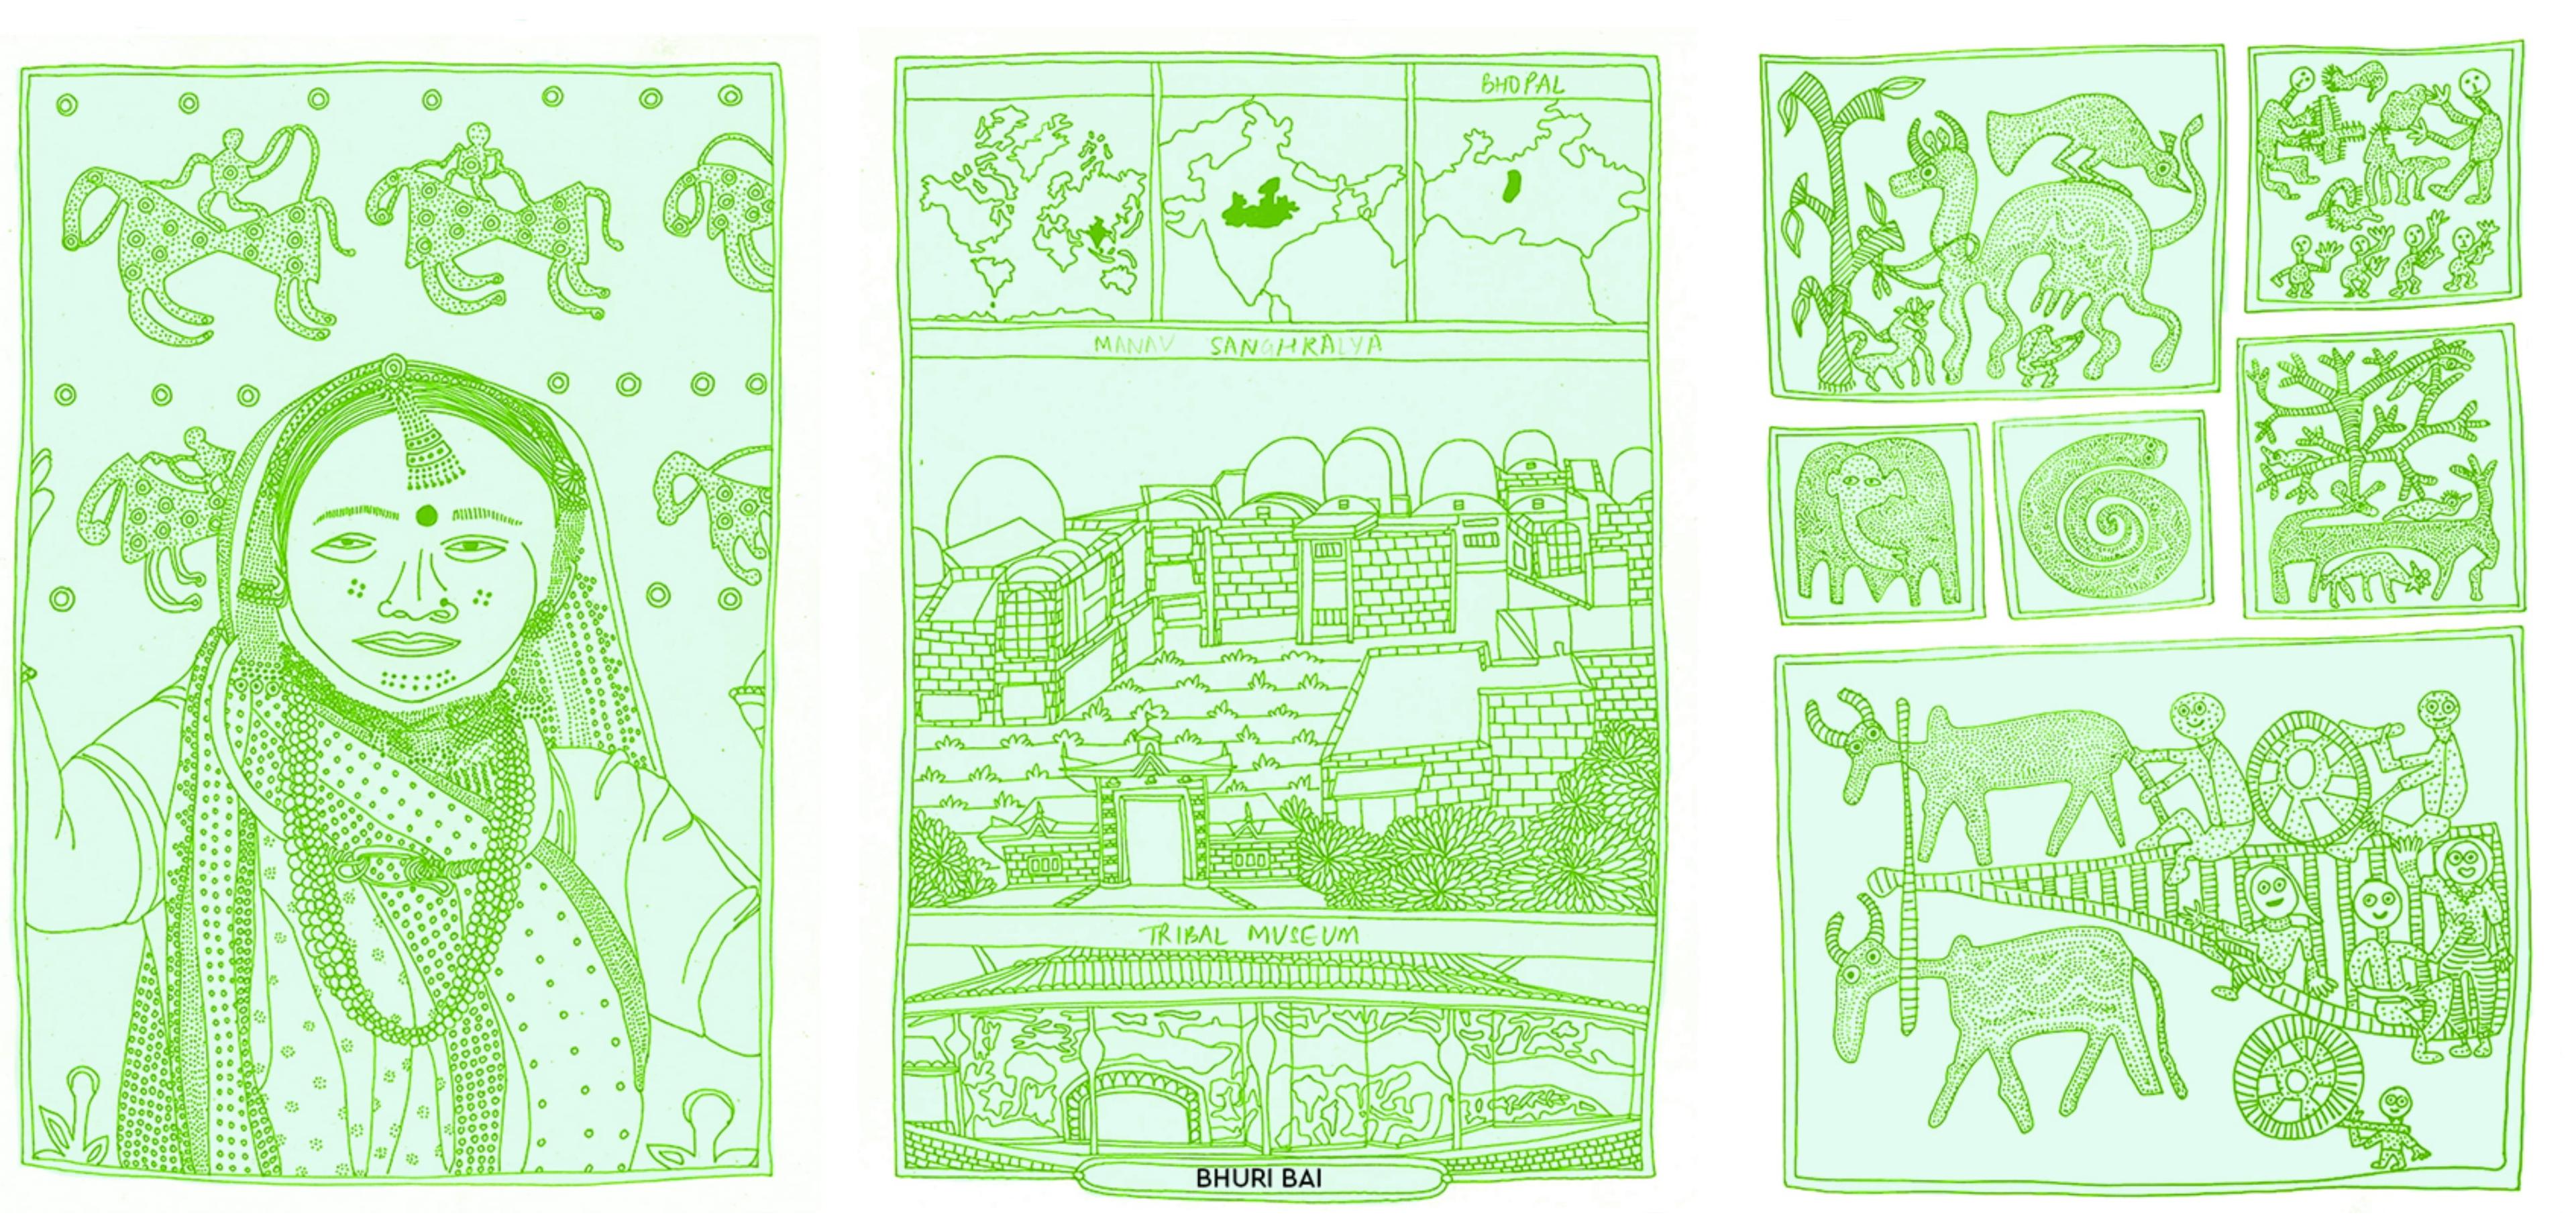 Page from The Dot issue - three images with a green tint featuring Bhuri bai and her art style